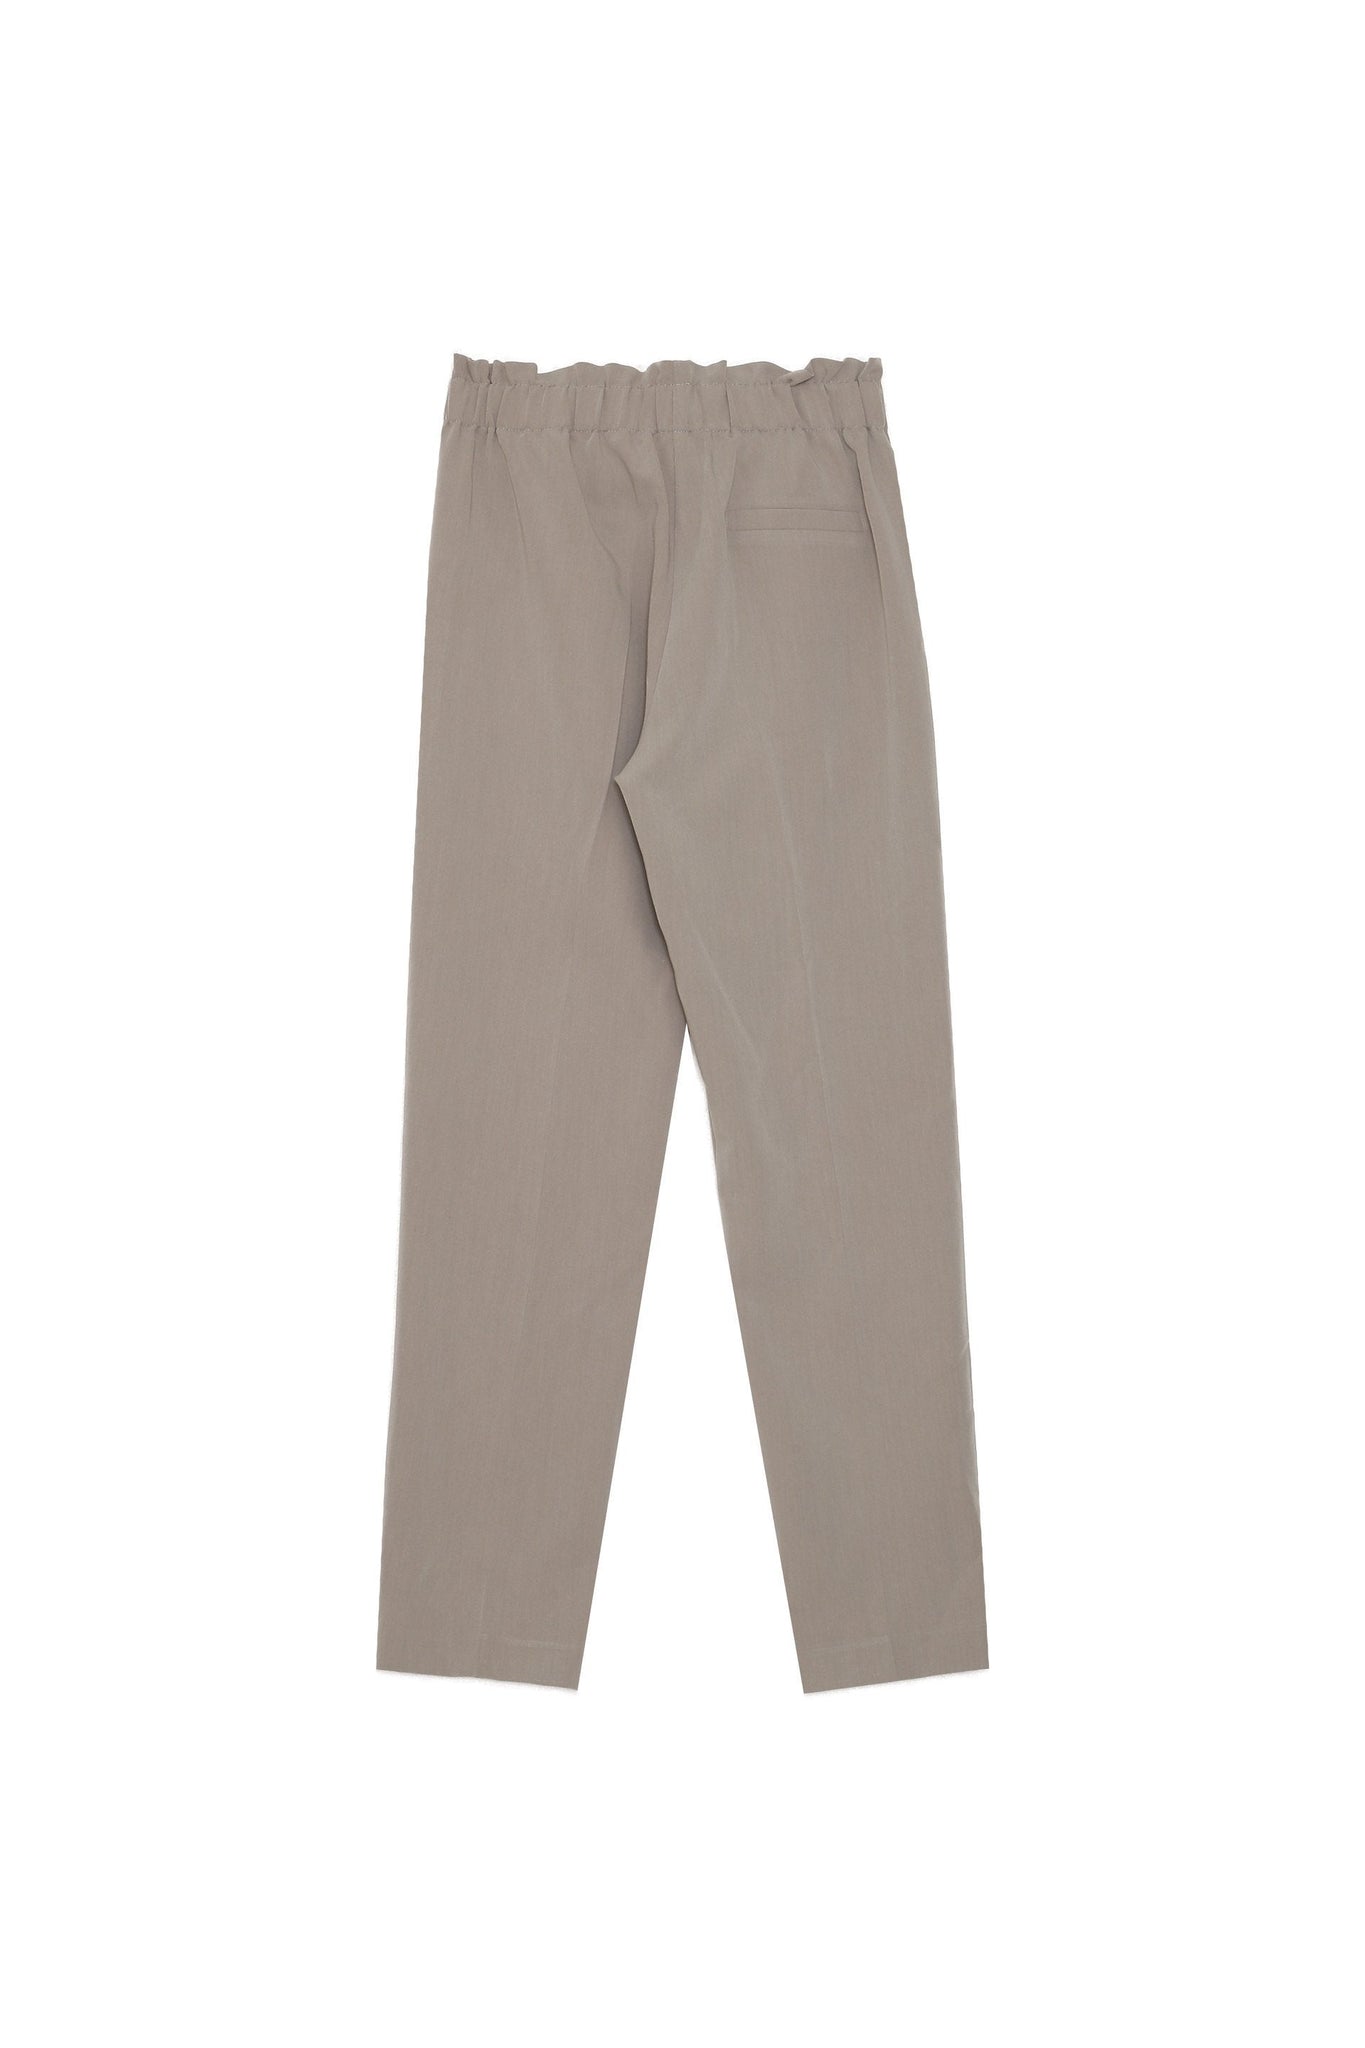 Grace & Mila Grey Pleated Trousers with Italian Pockets - Your Style Your Story